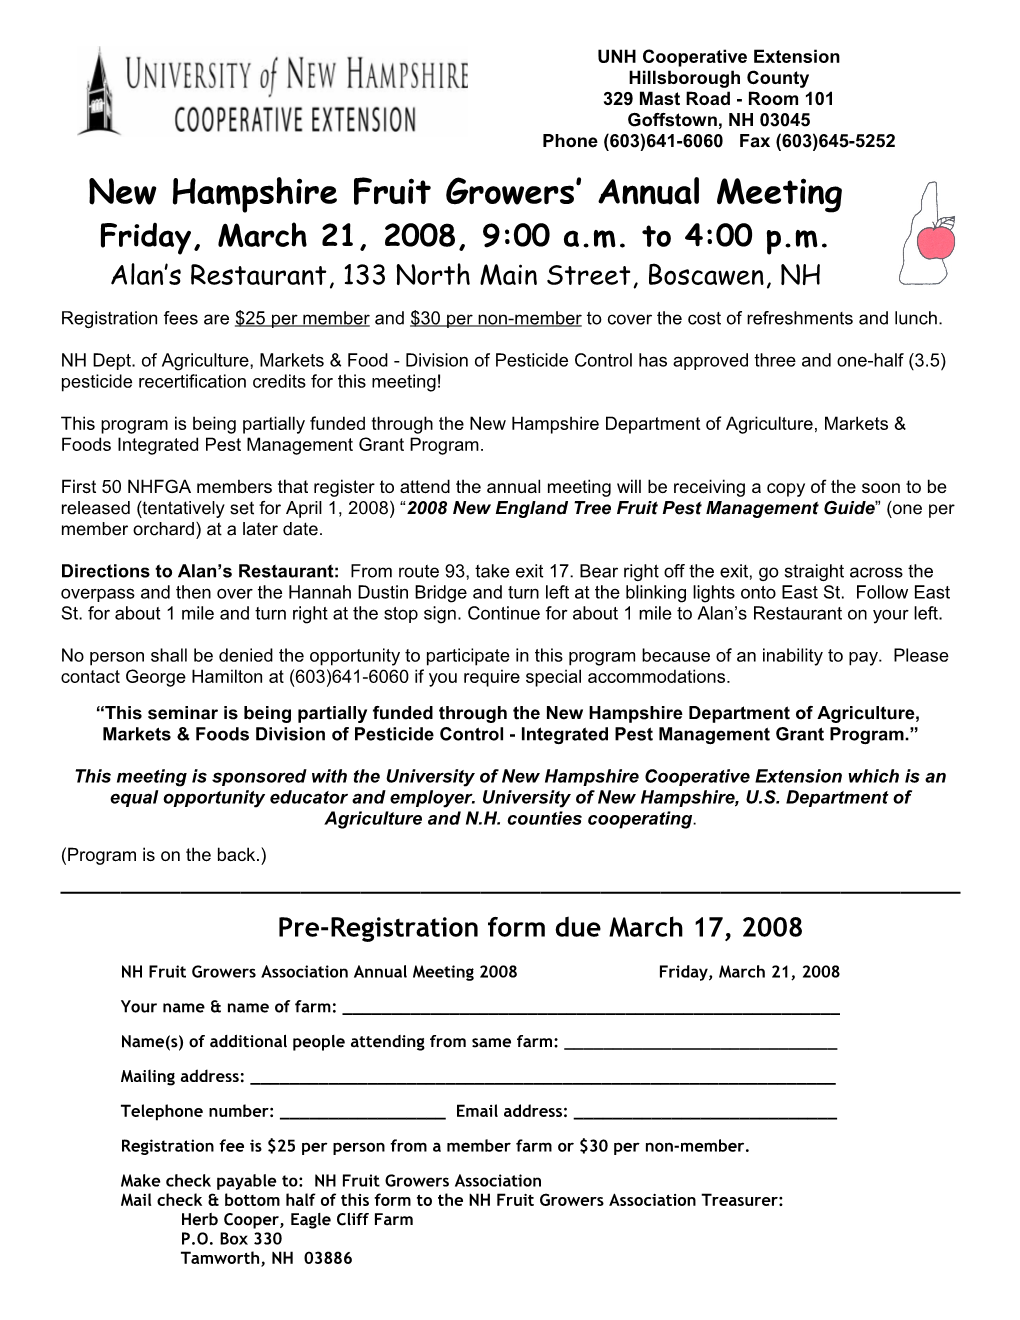 New Hampshire Fruit Growers Annual Meeting